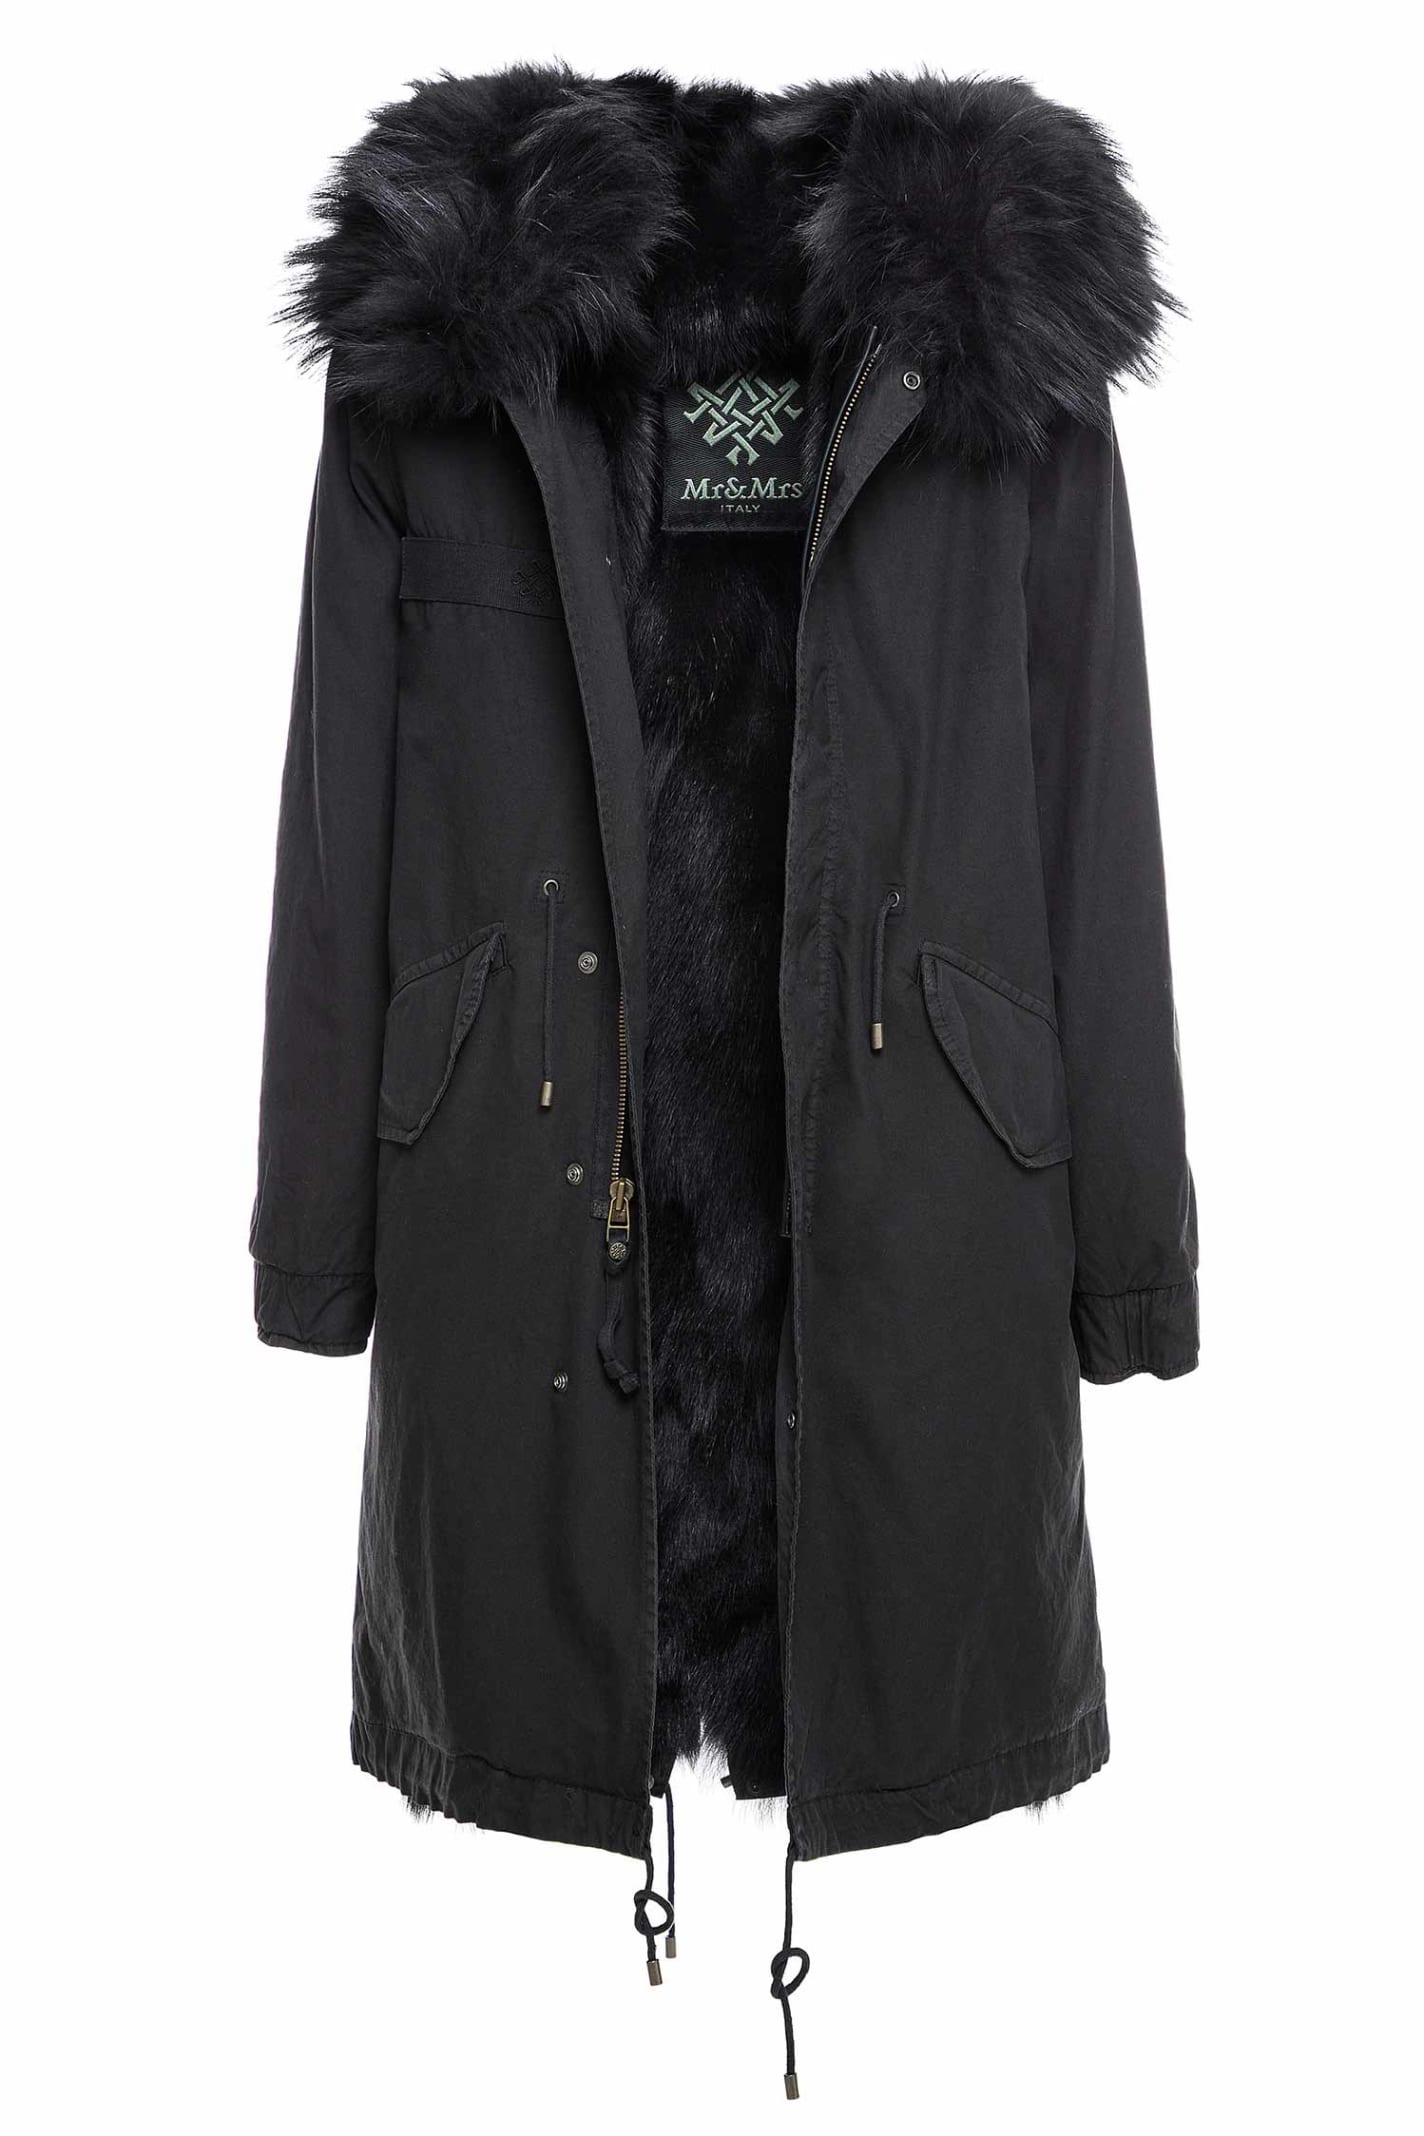 Mr & Mrs Italy Exclusive Fw20 Icon Parka: Black Parka Patch Fox Raccoon Fur